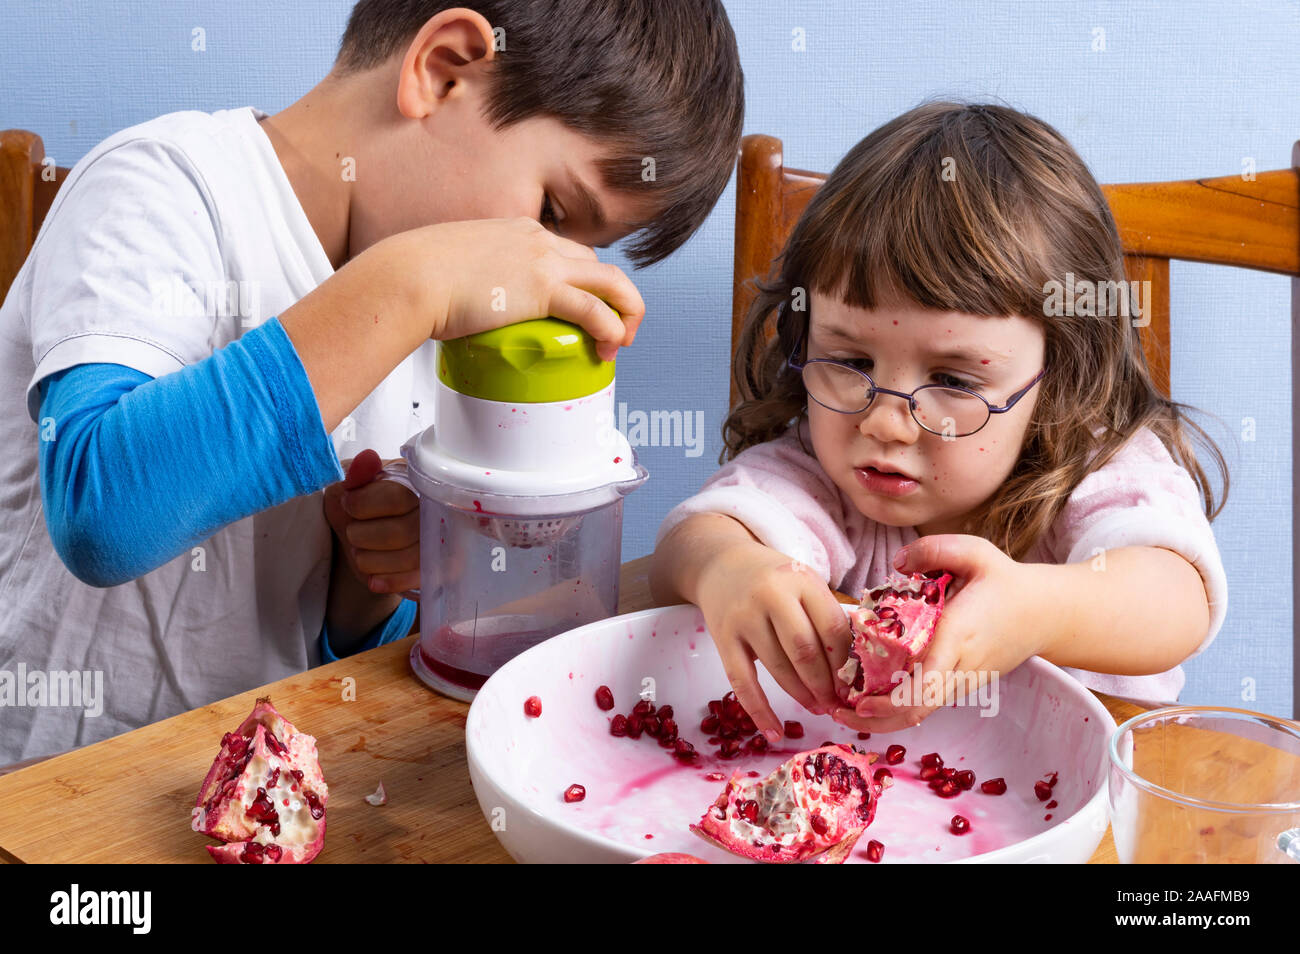 Young boy and girl siblings squeeze pomegranate juice, making a mess. Face and clothes dirty with red spots. Healthy food concept. Stock Photo